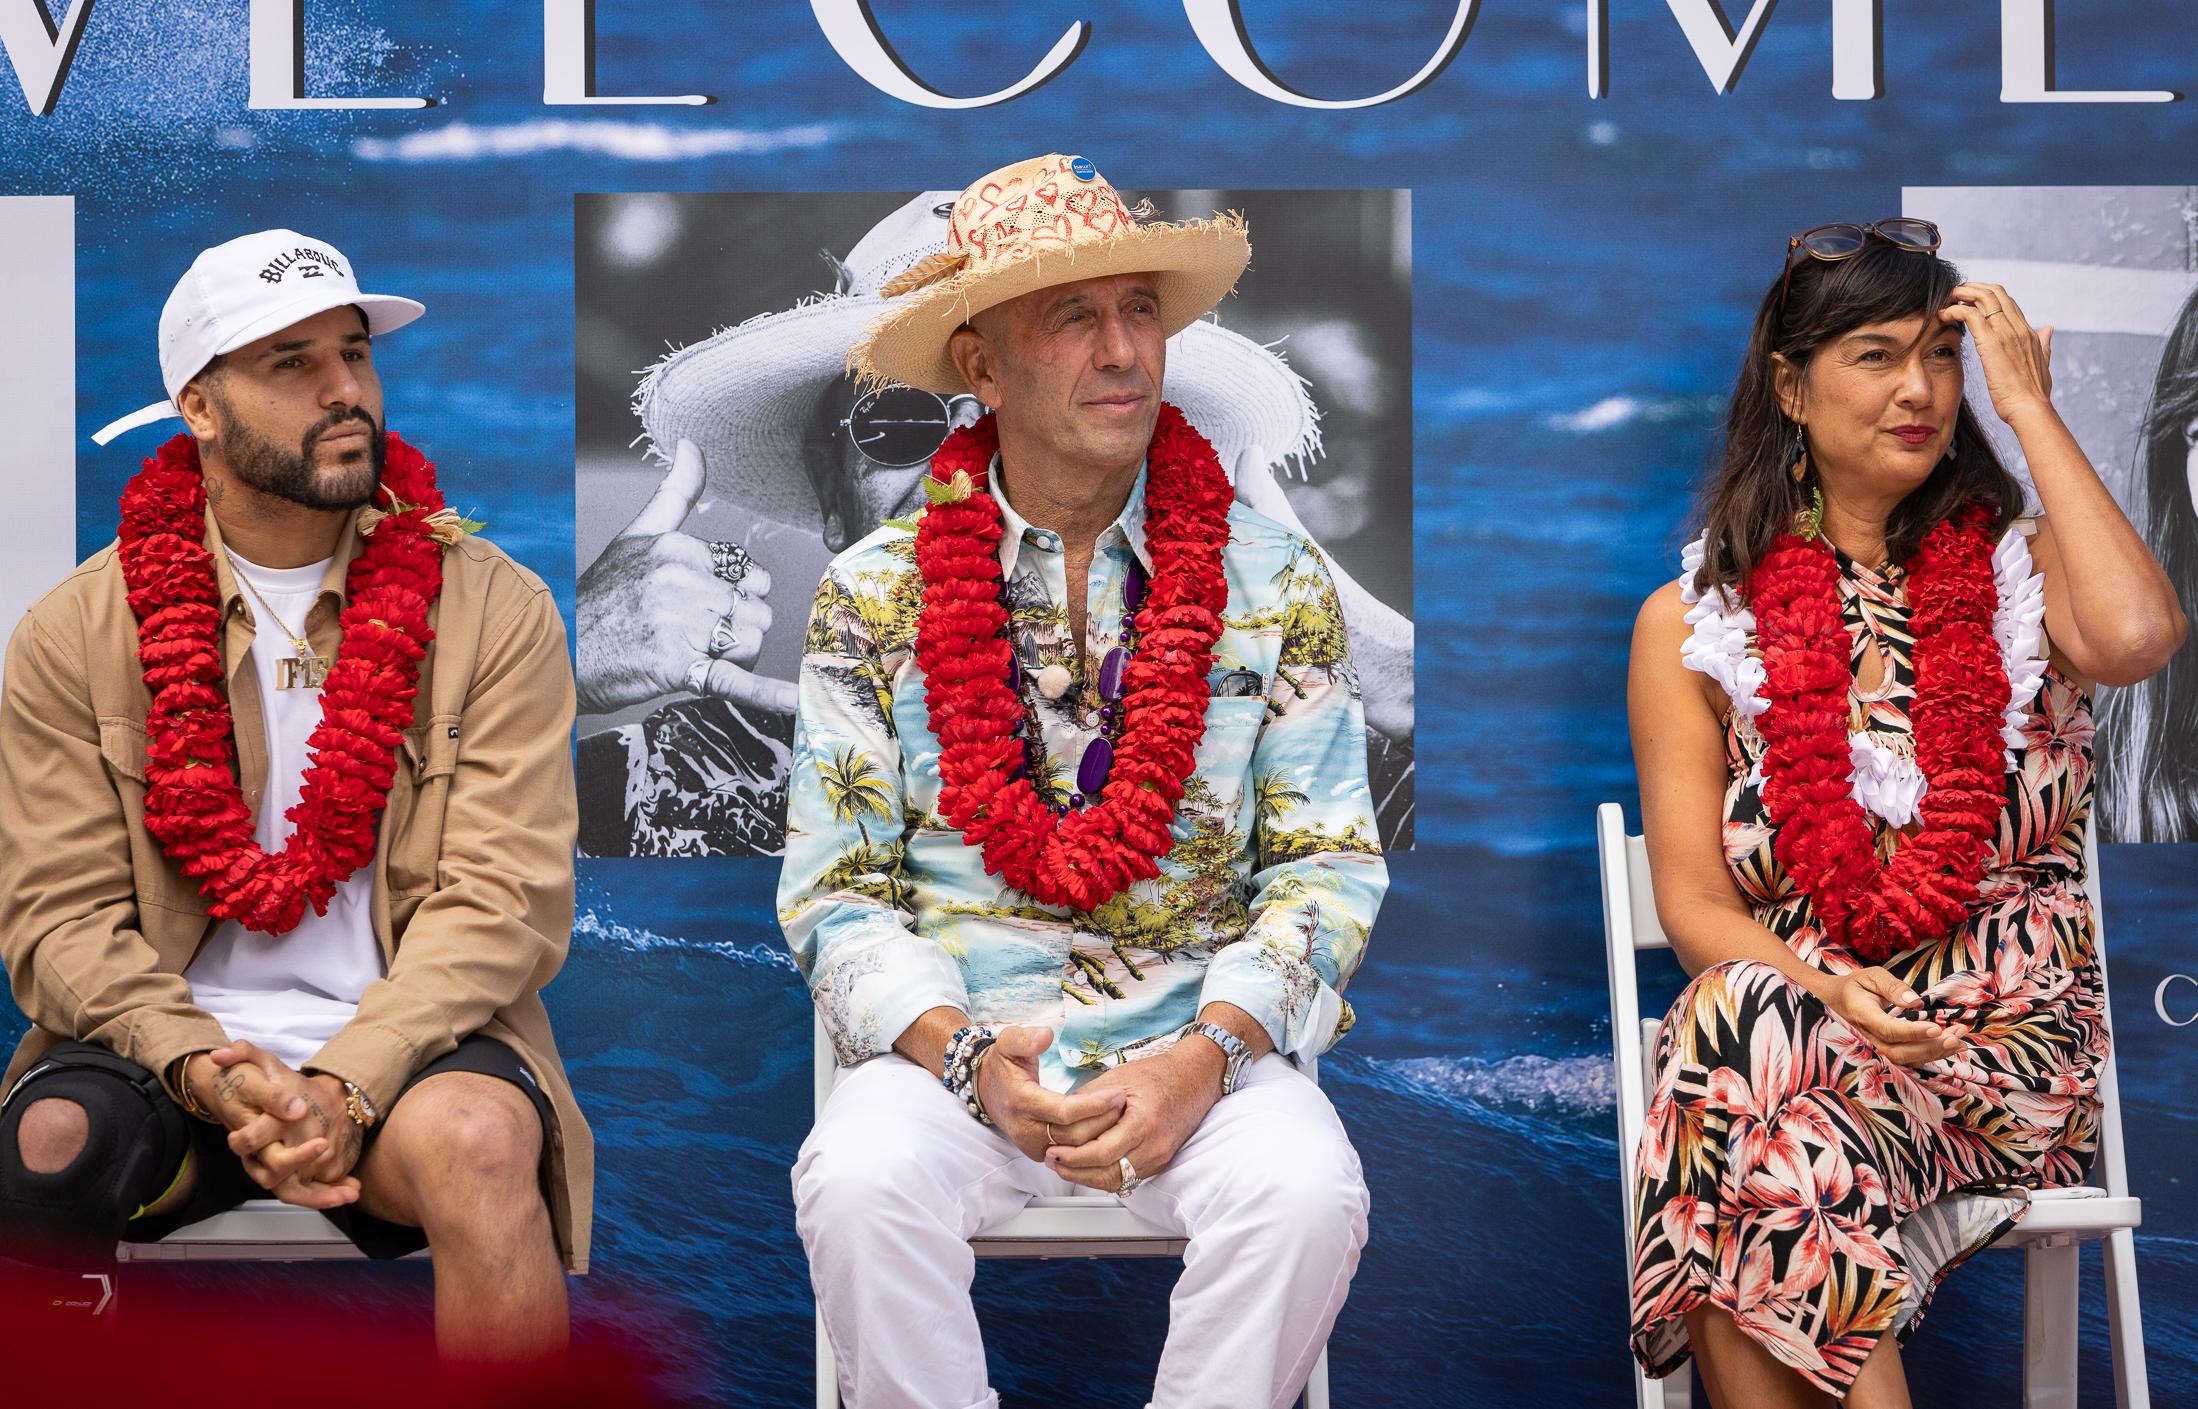 US Open of Surfing Celebrations Welcome 3 Surfers to ‘Hall of Fame’